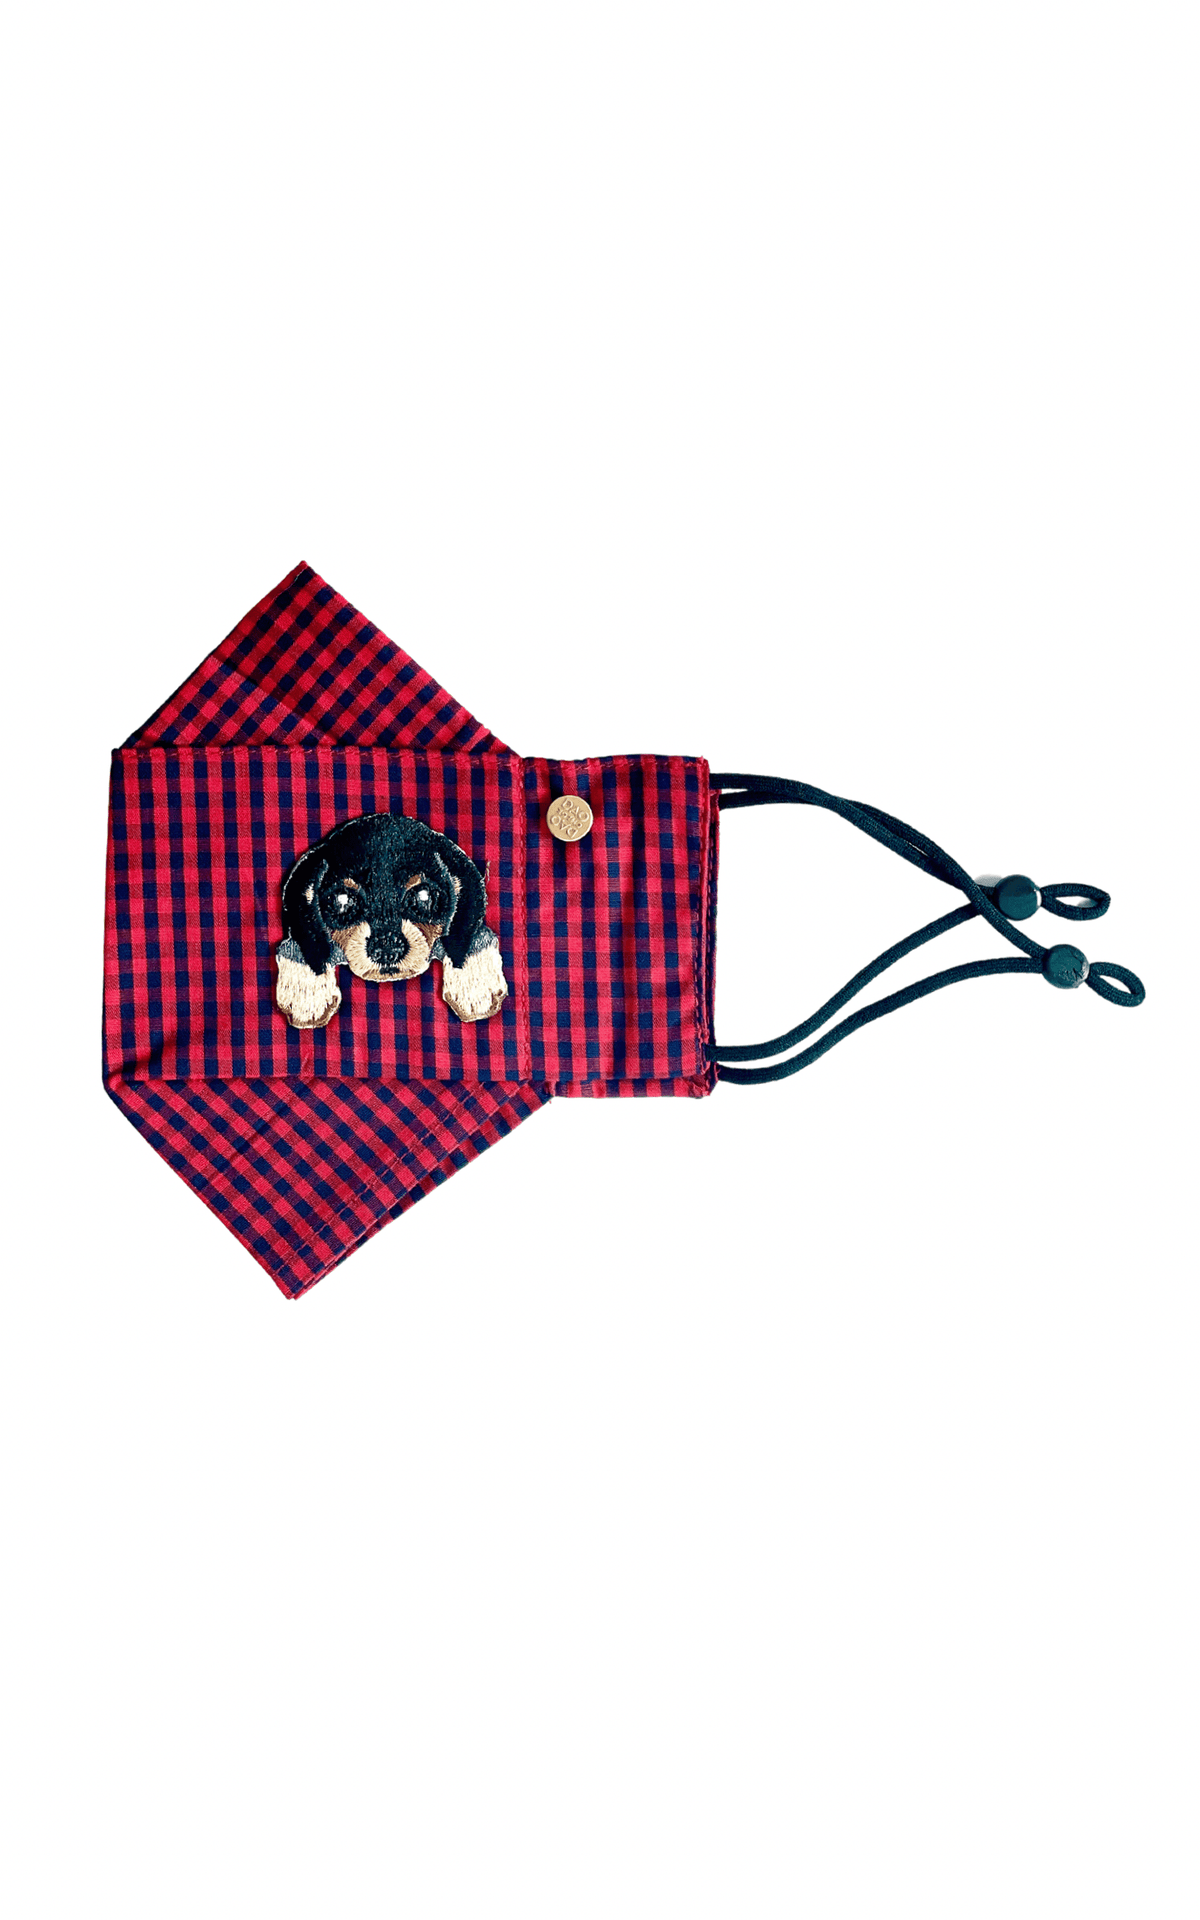 Box Pleated Face Masks Wiener Red Gingham Box Pleat Mask ( w Filter Pocket) - Chloe Dao